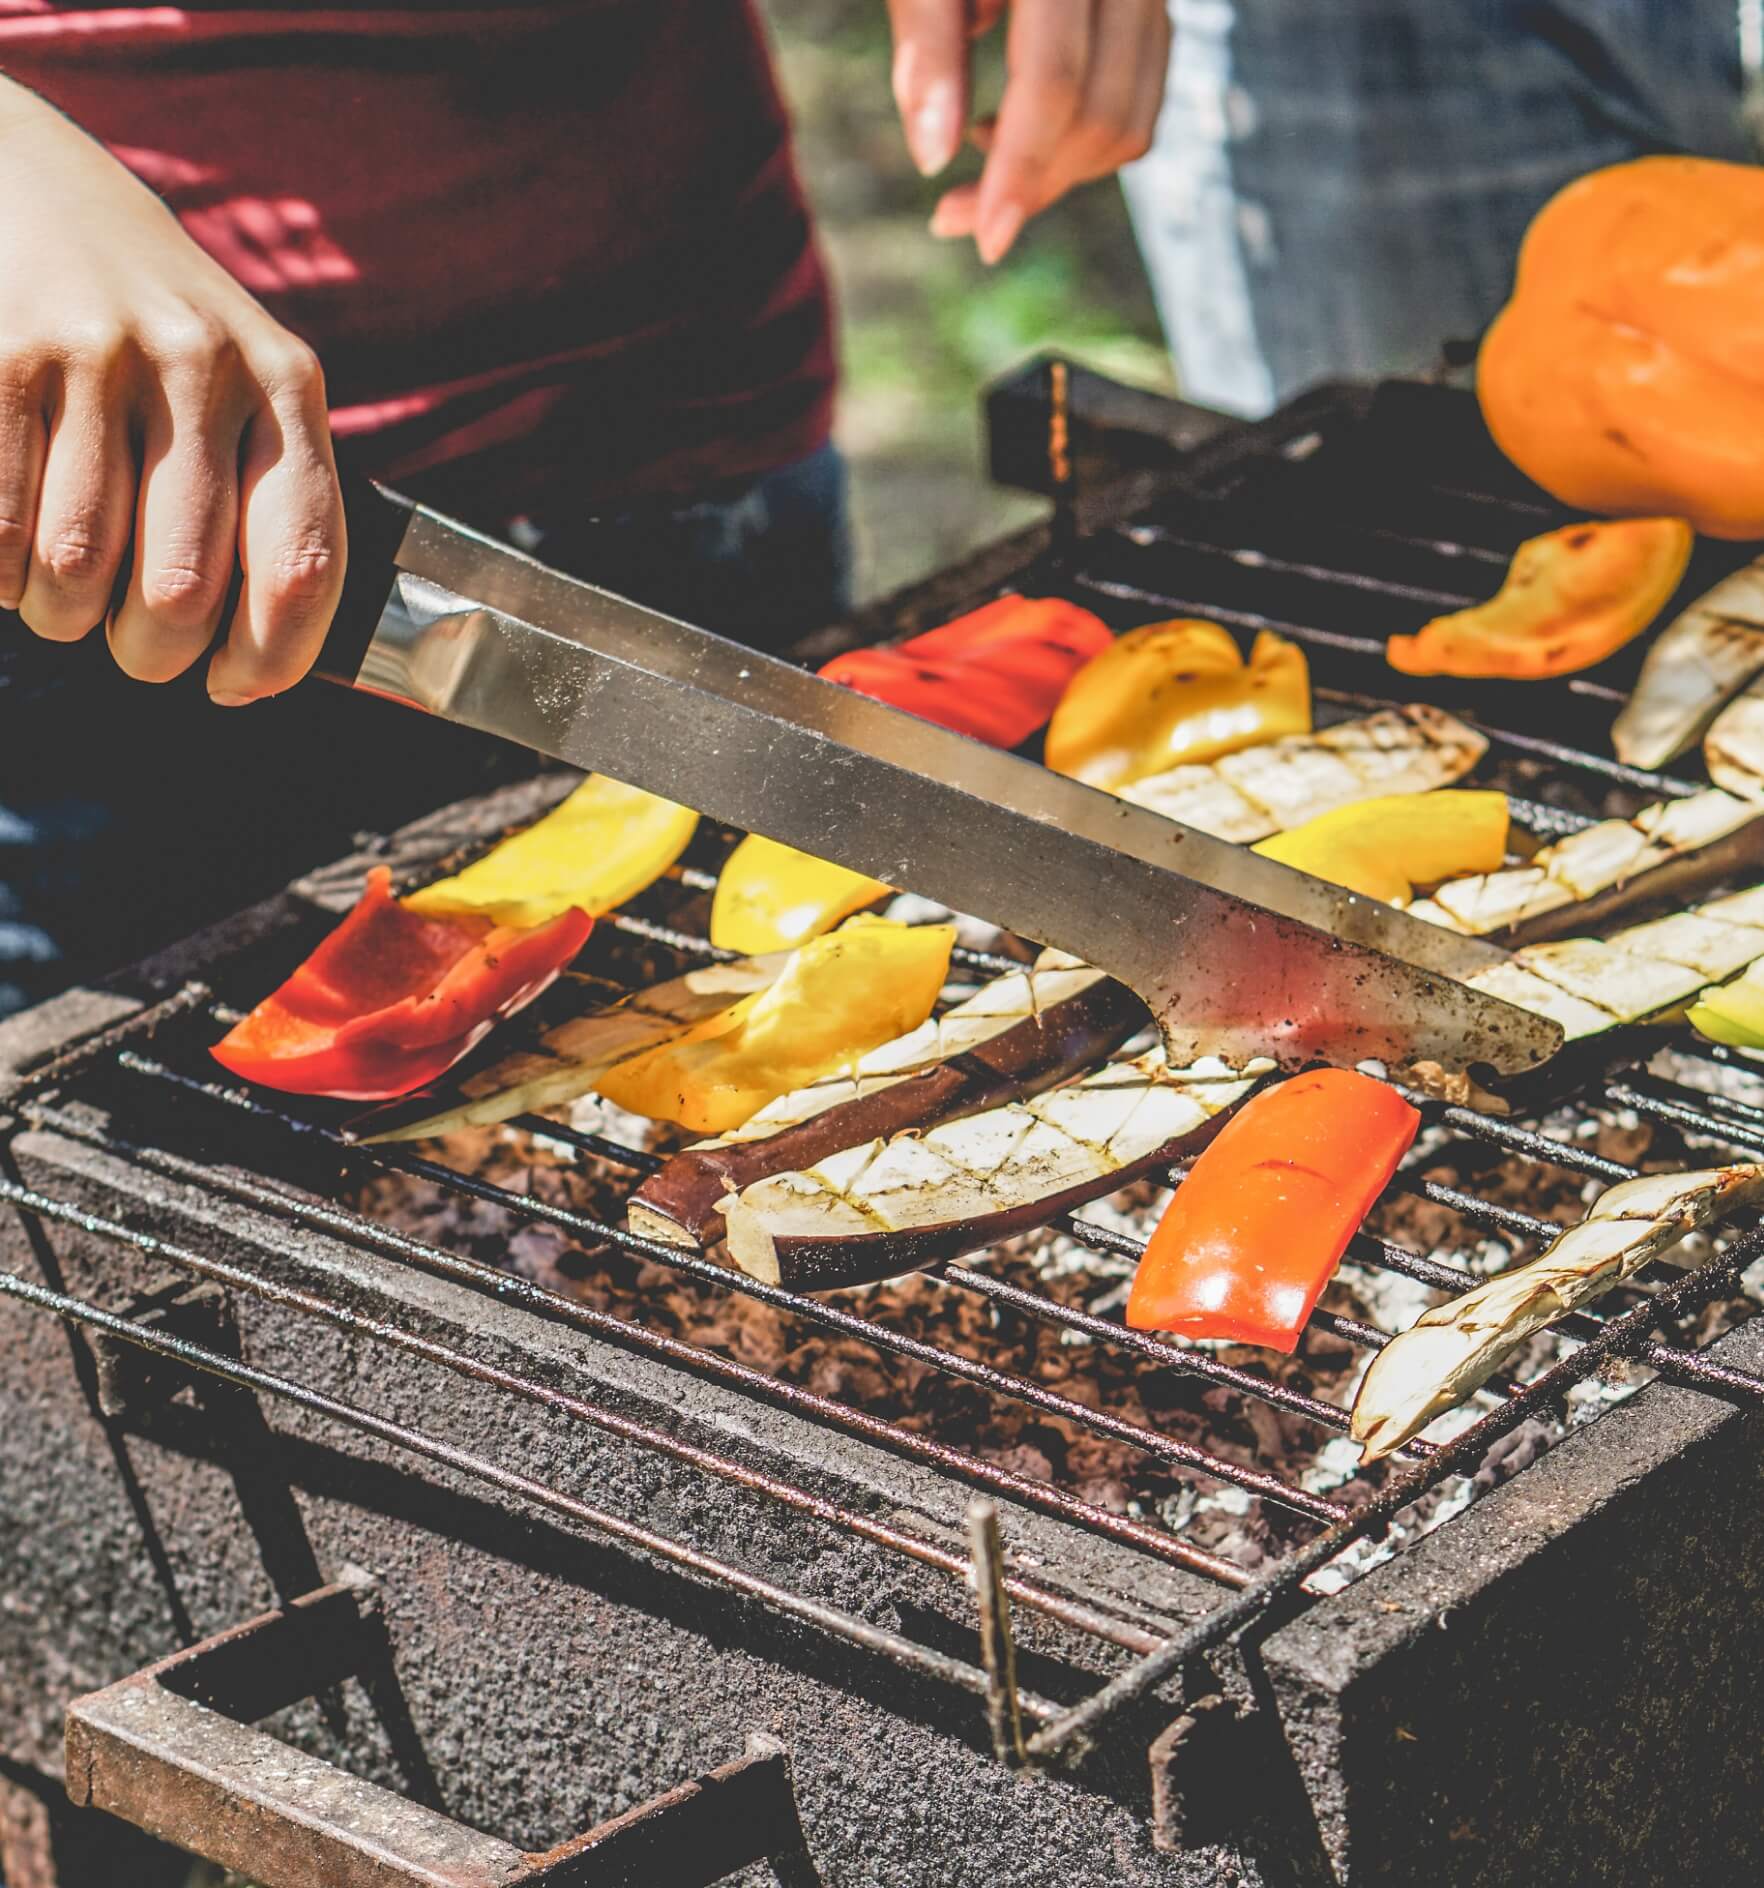 Image showing a man grilling veggies on a barbecue